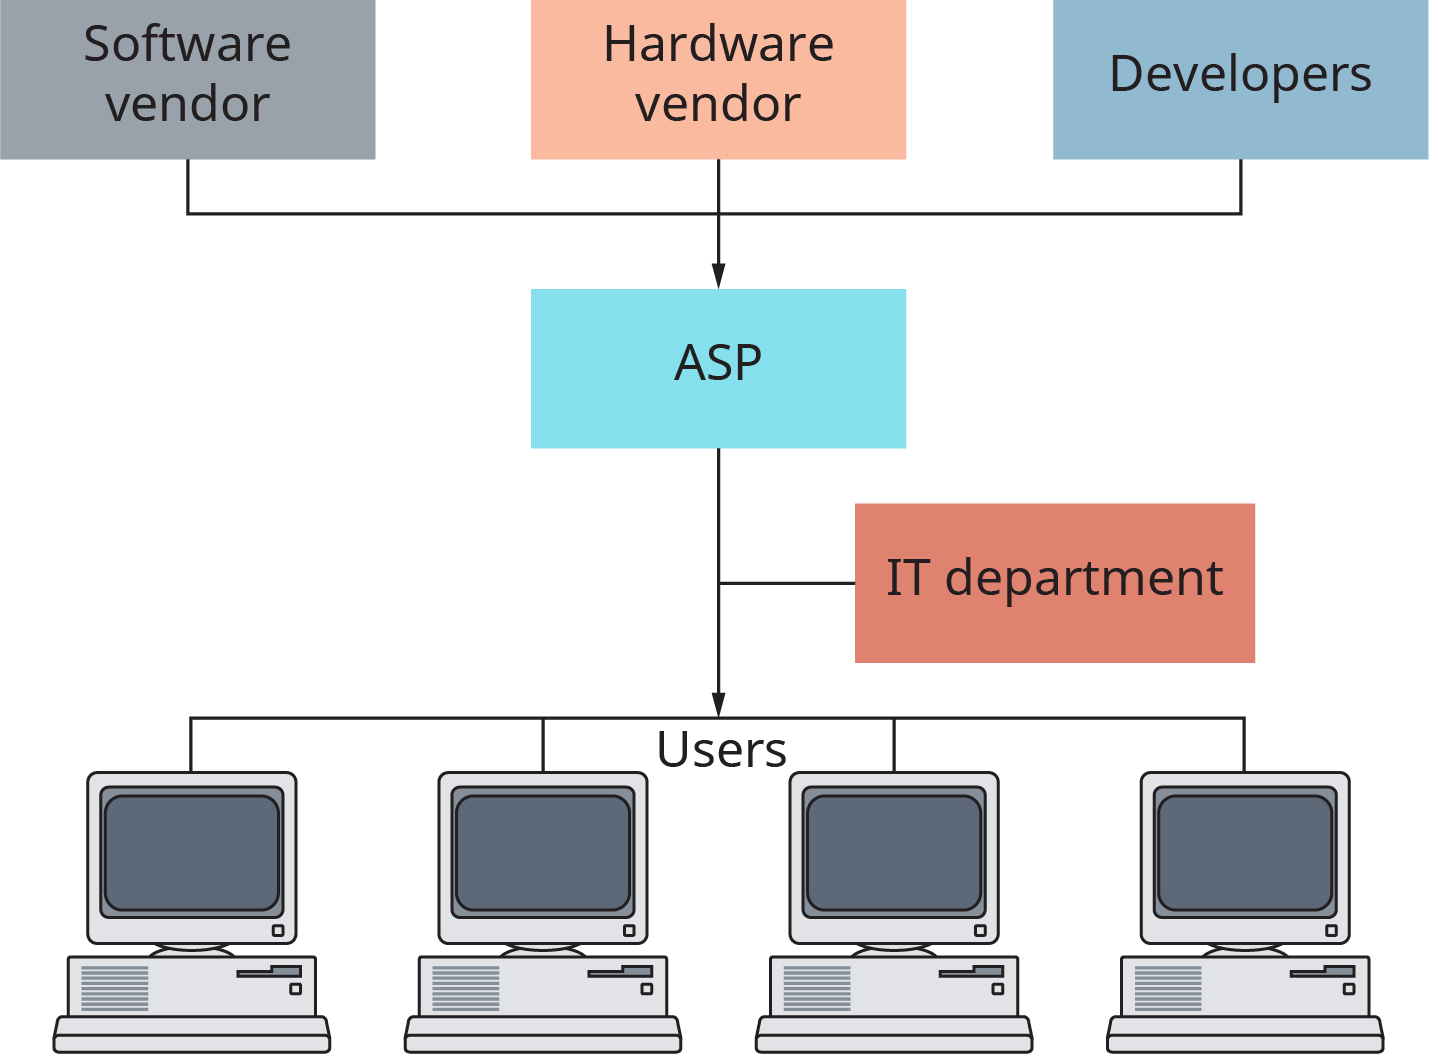 A diagram shows that a software vendor, hardware vendor, and developers all flow into an A S P, which then flows into an audience of users. Between the A S P and the users is the I T department.